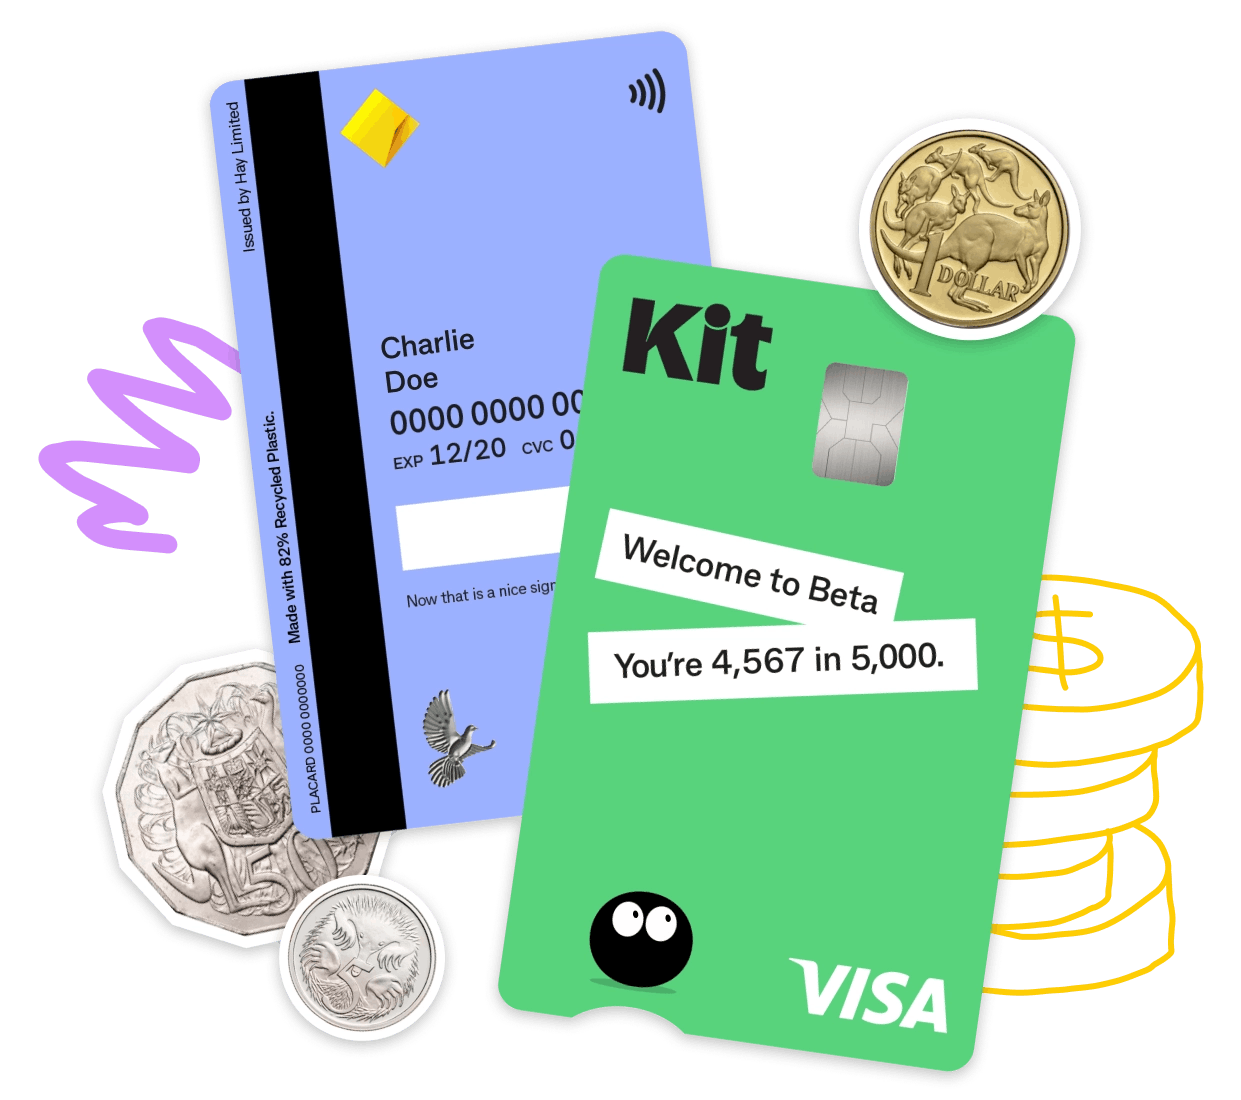 Kit prepaid card for your kids